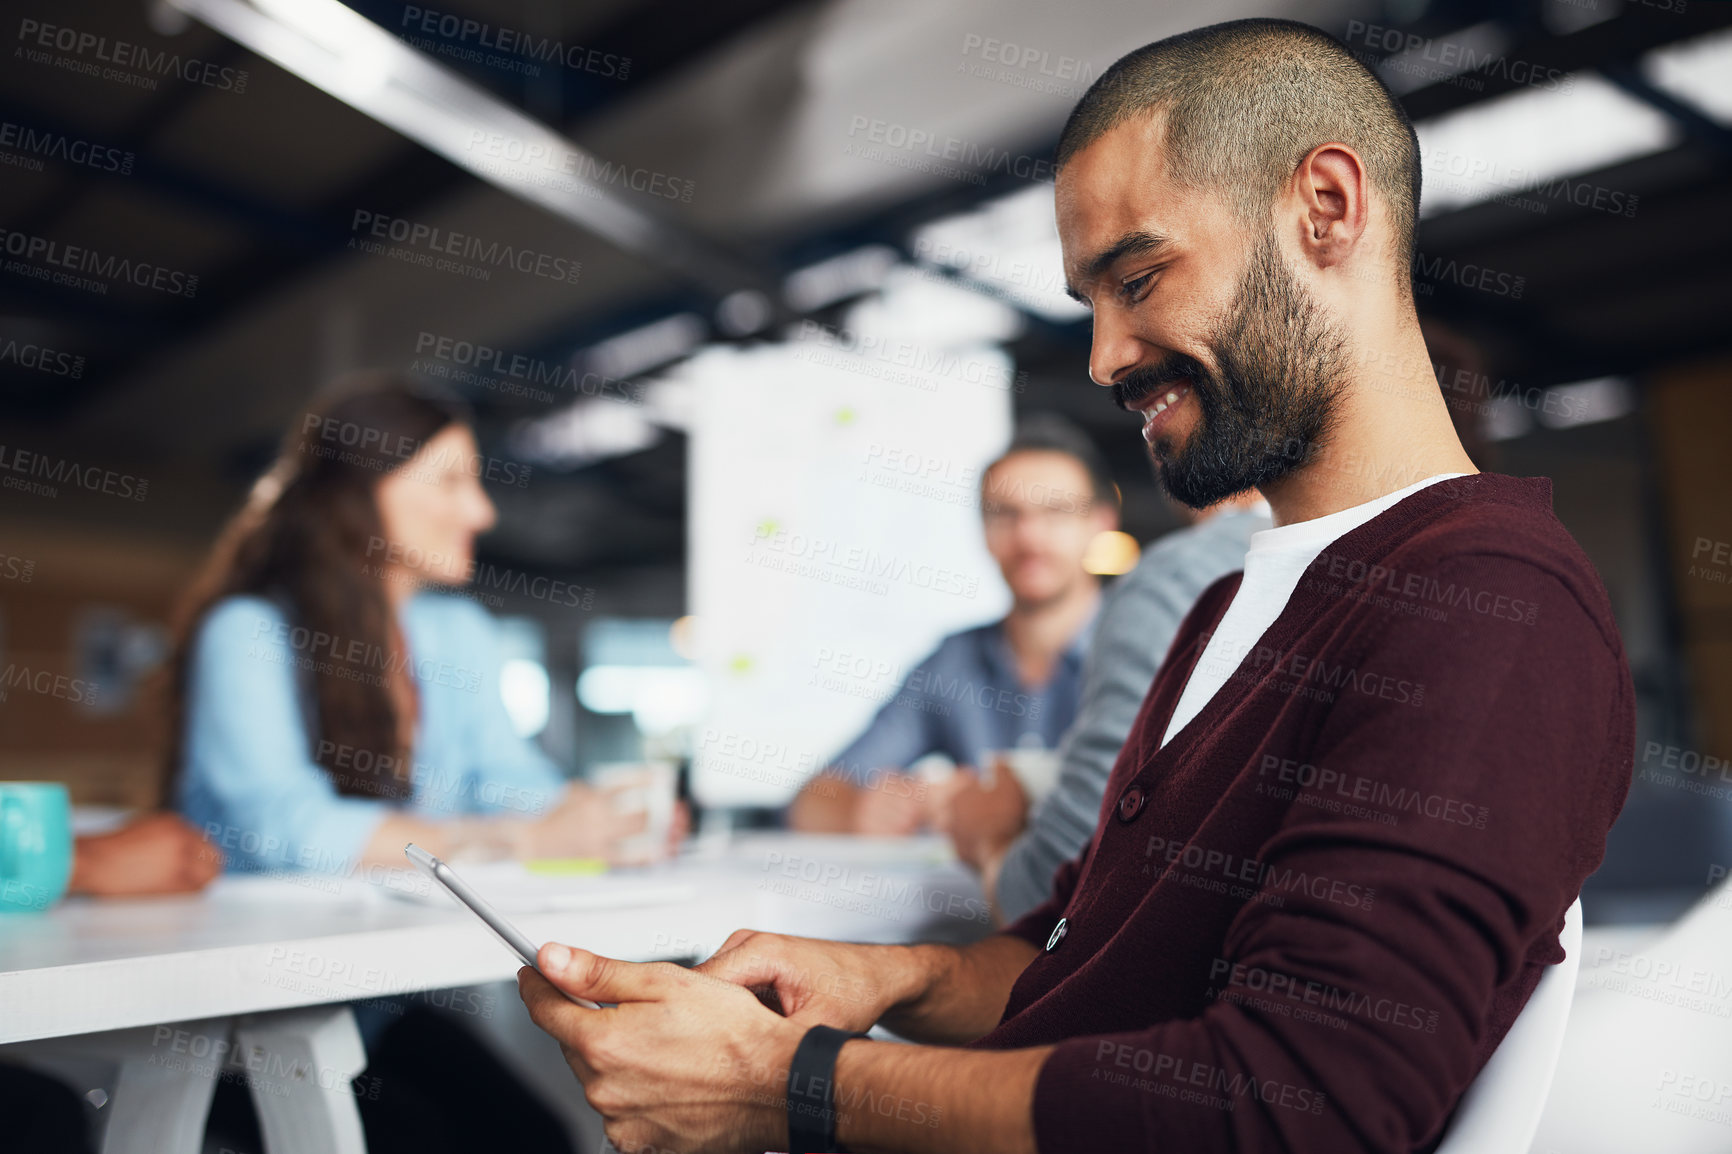 Buy stock photo Shot of a young man sitting at a table in an office using a digital tablet with colleagues working in the background